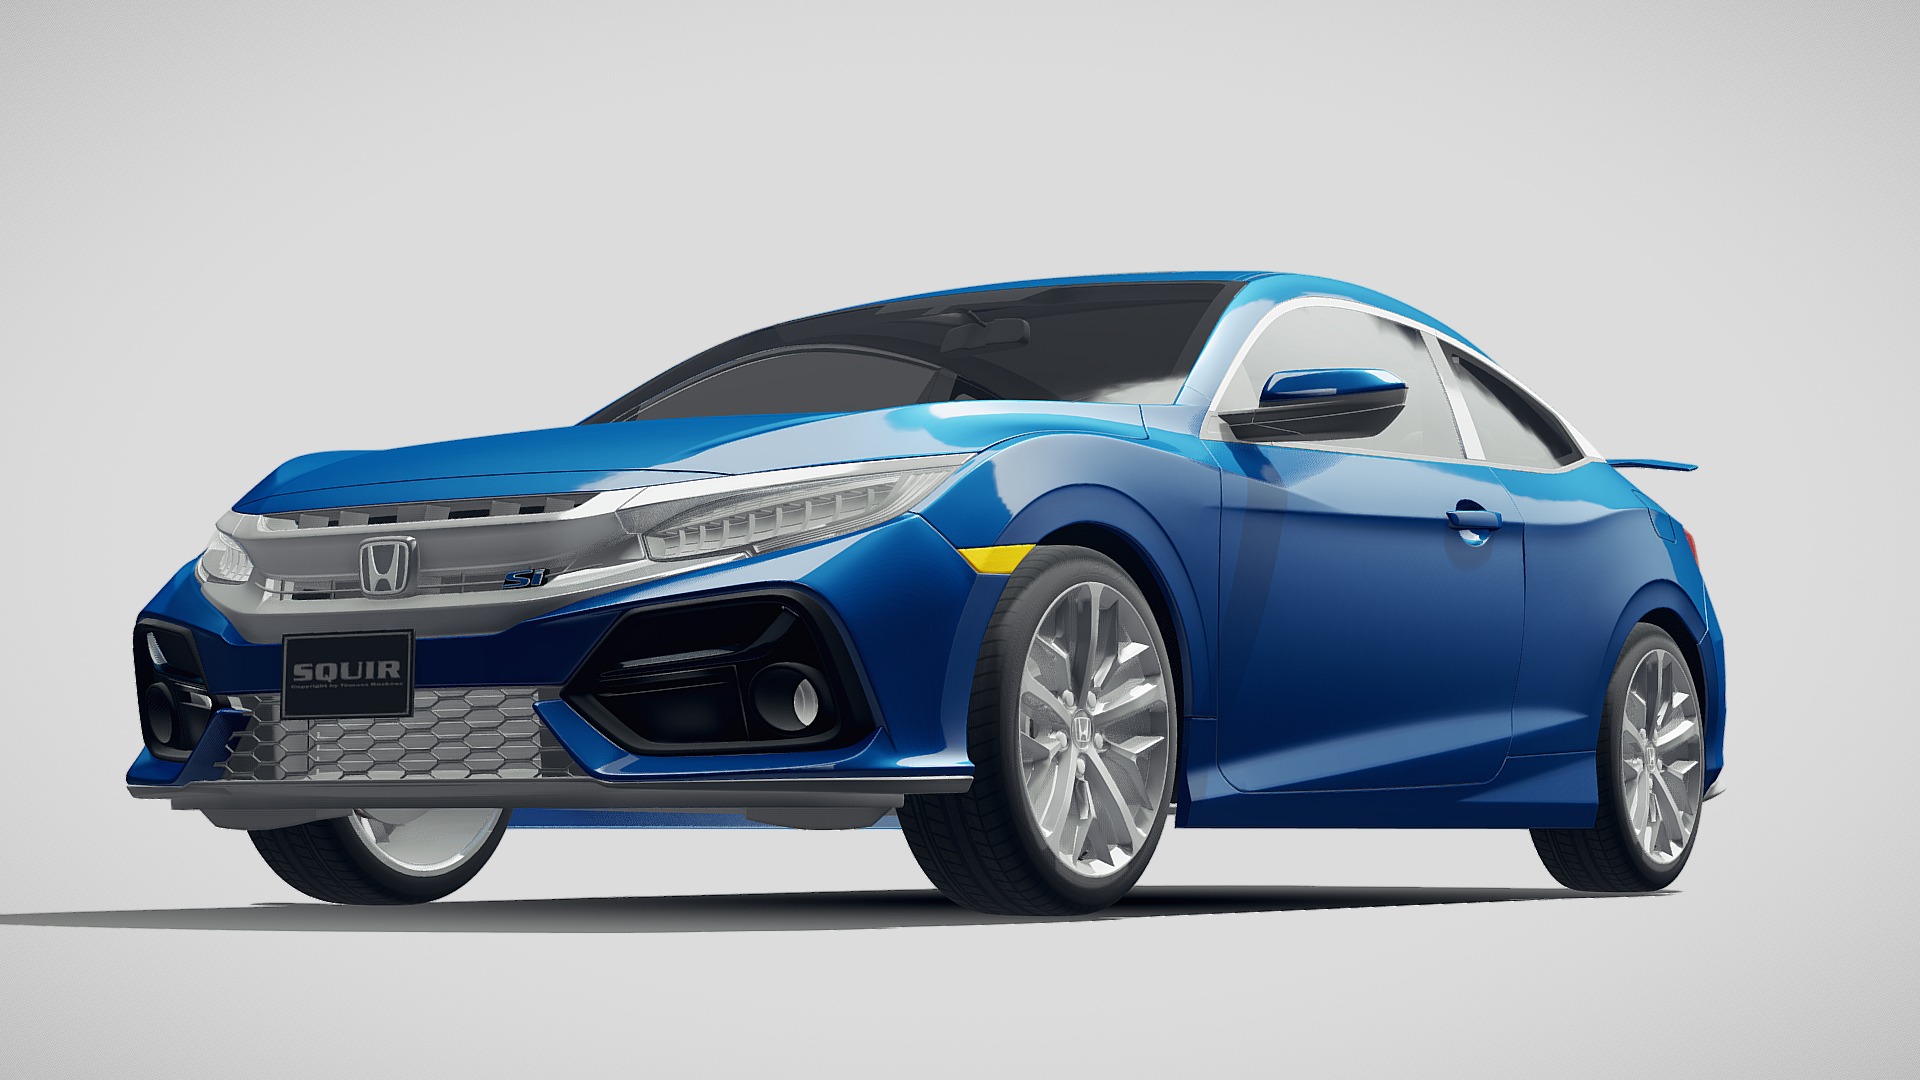 3D model Honda Civic Si Coupe 2020 - This is a 3D model of the Honda Civic Si Coupe 2020. The 3D model is about a blue sports car.